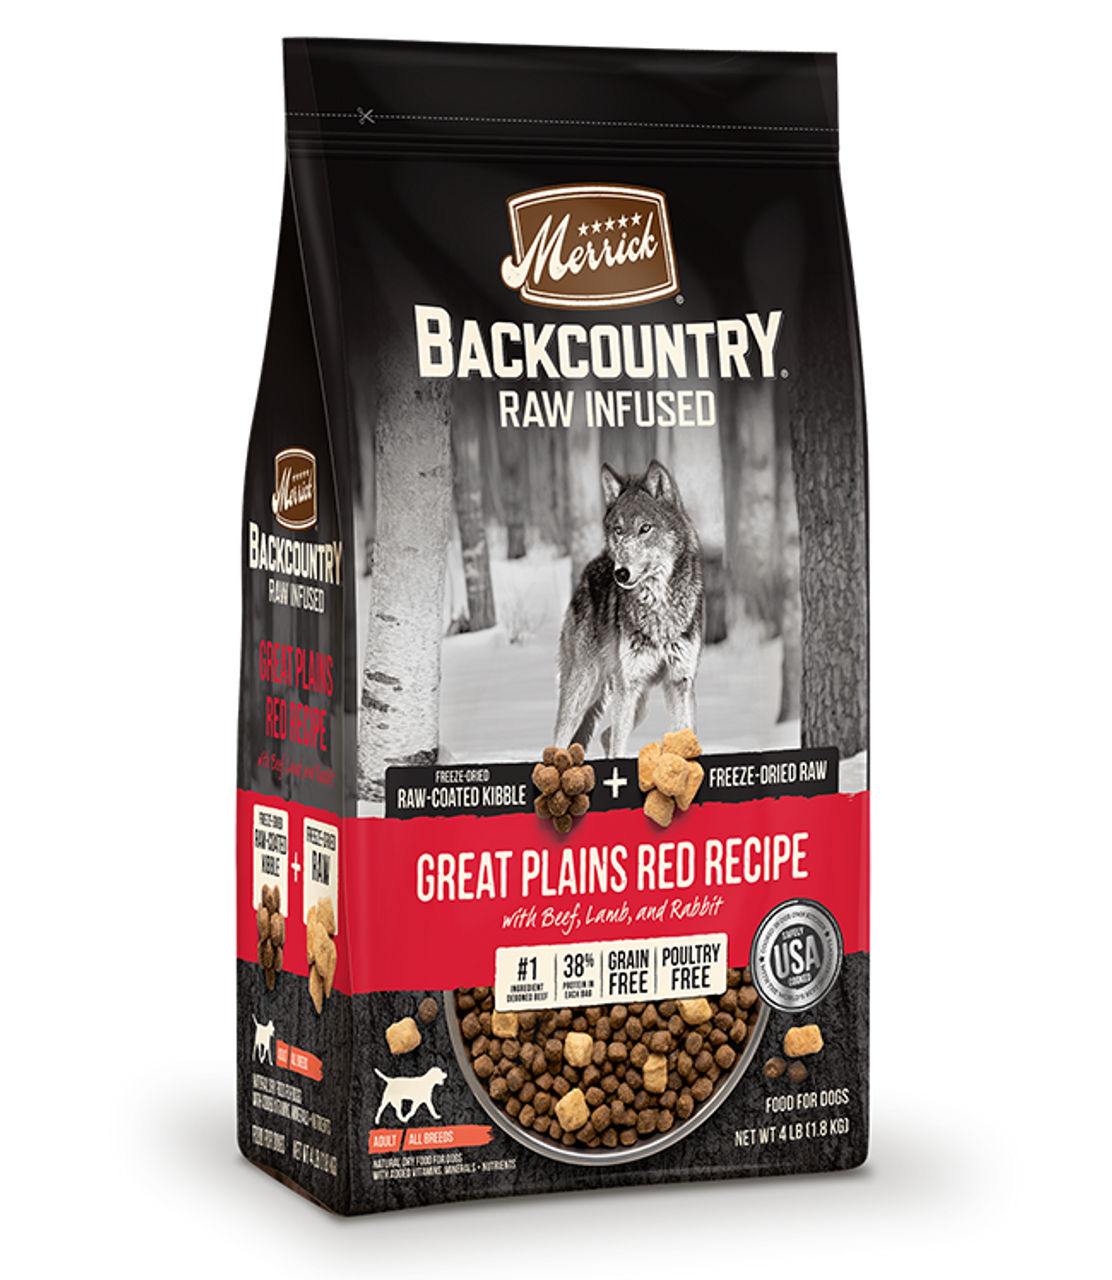 Big Discounts on Dog Food, Cat Food, Pet Accessories and more at